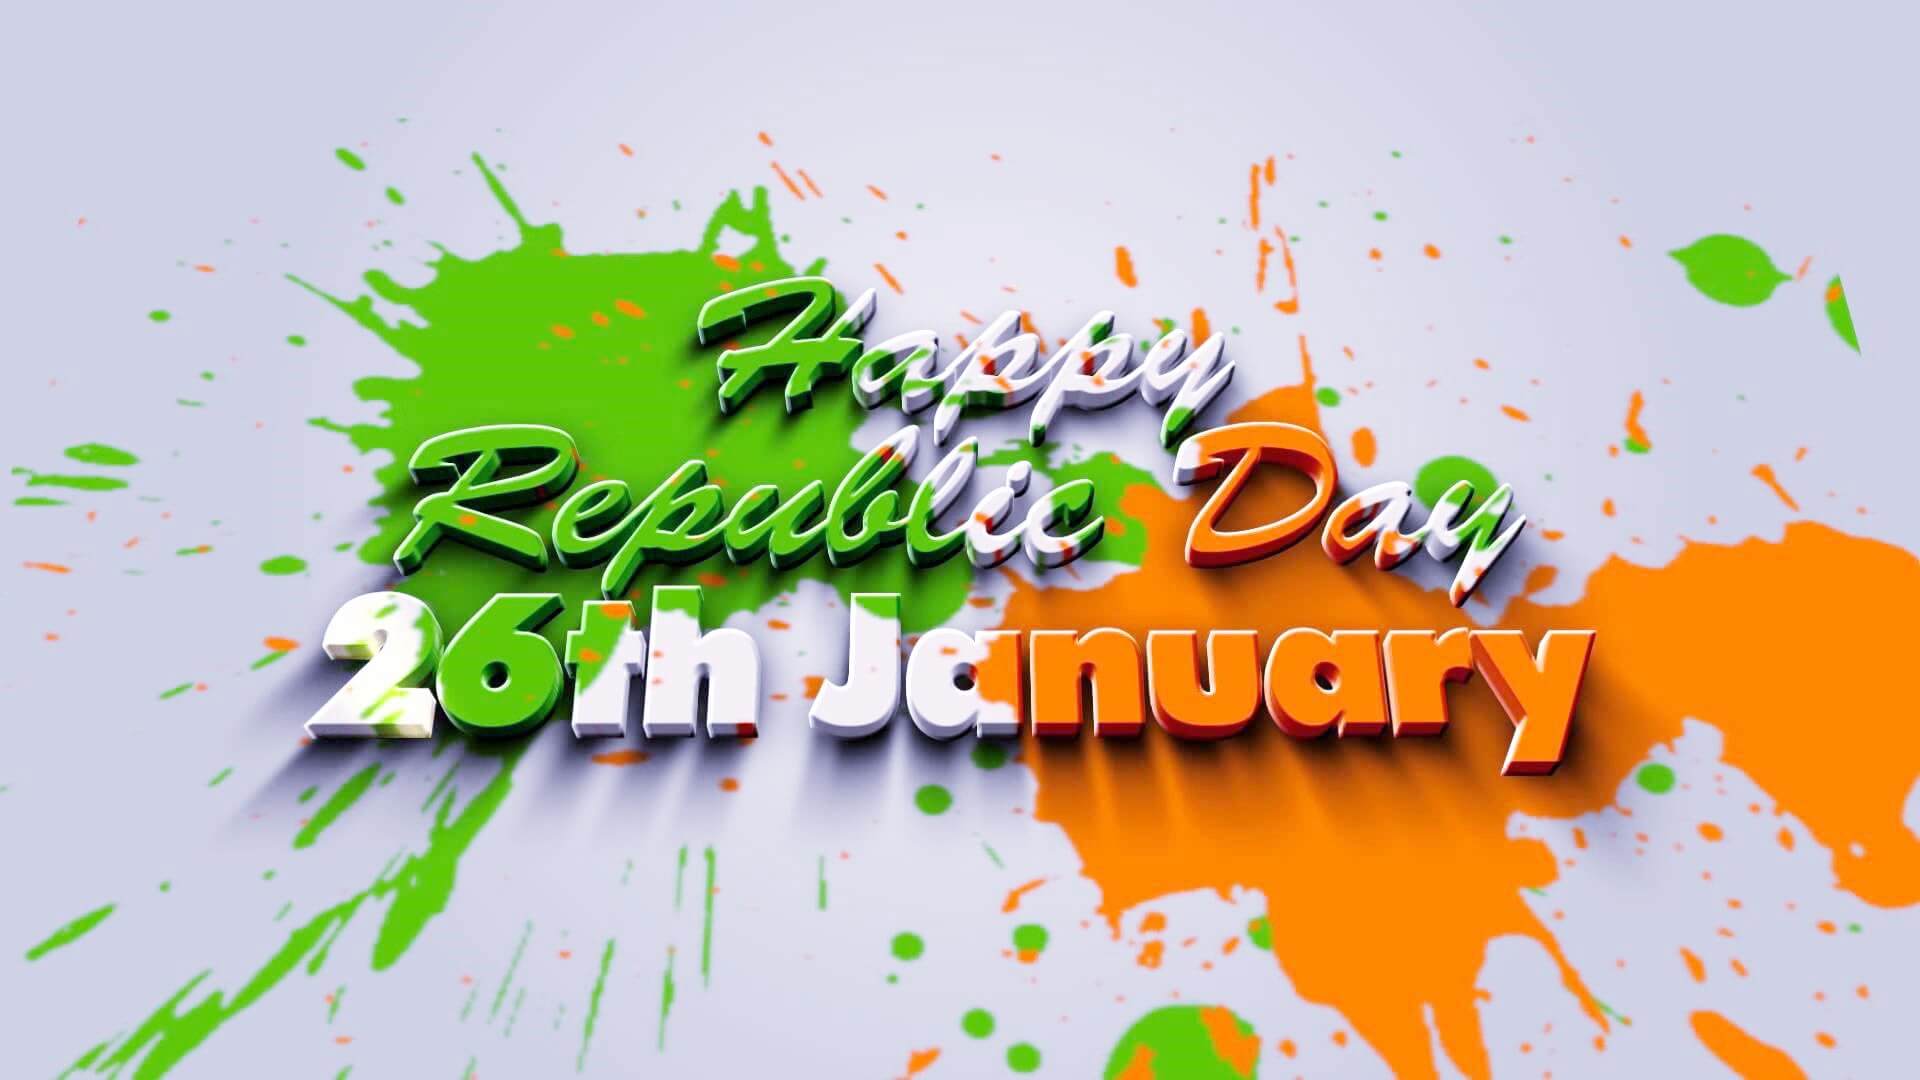 100 Best 26 January Background | Republic Day Backgrounds ideas | editing  background, republic day, january background